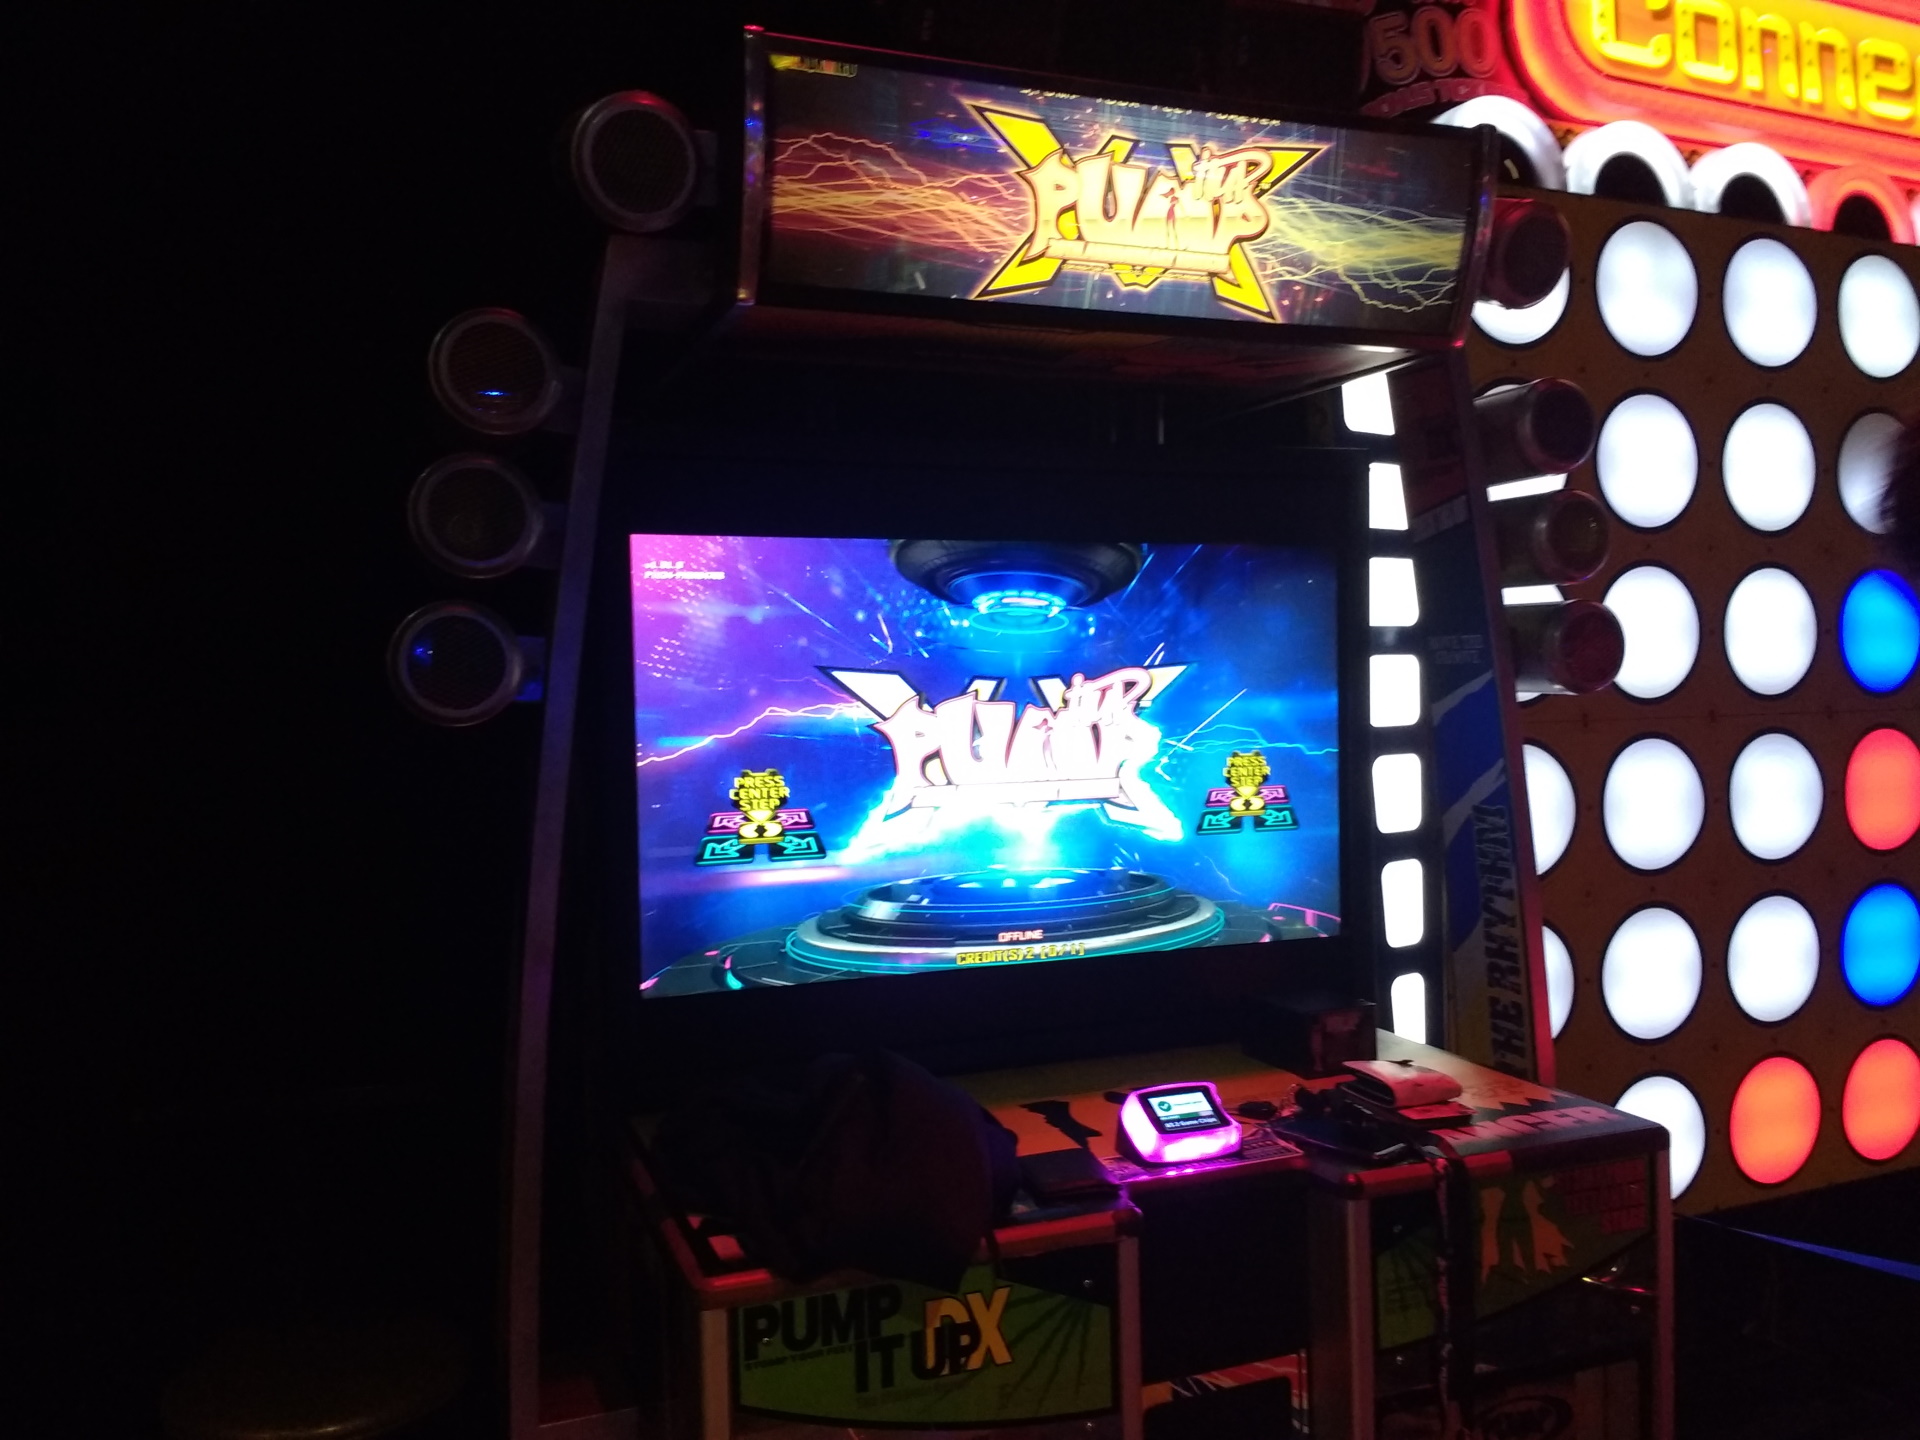 Photo of the Pump it Up cabinet at Dave & Buster's